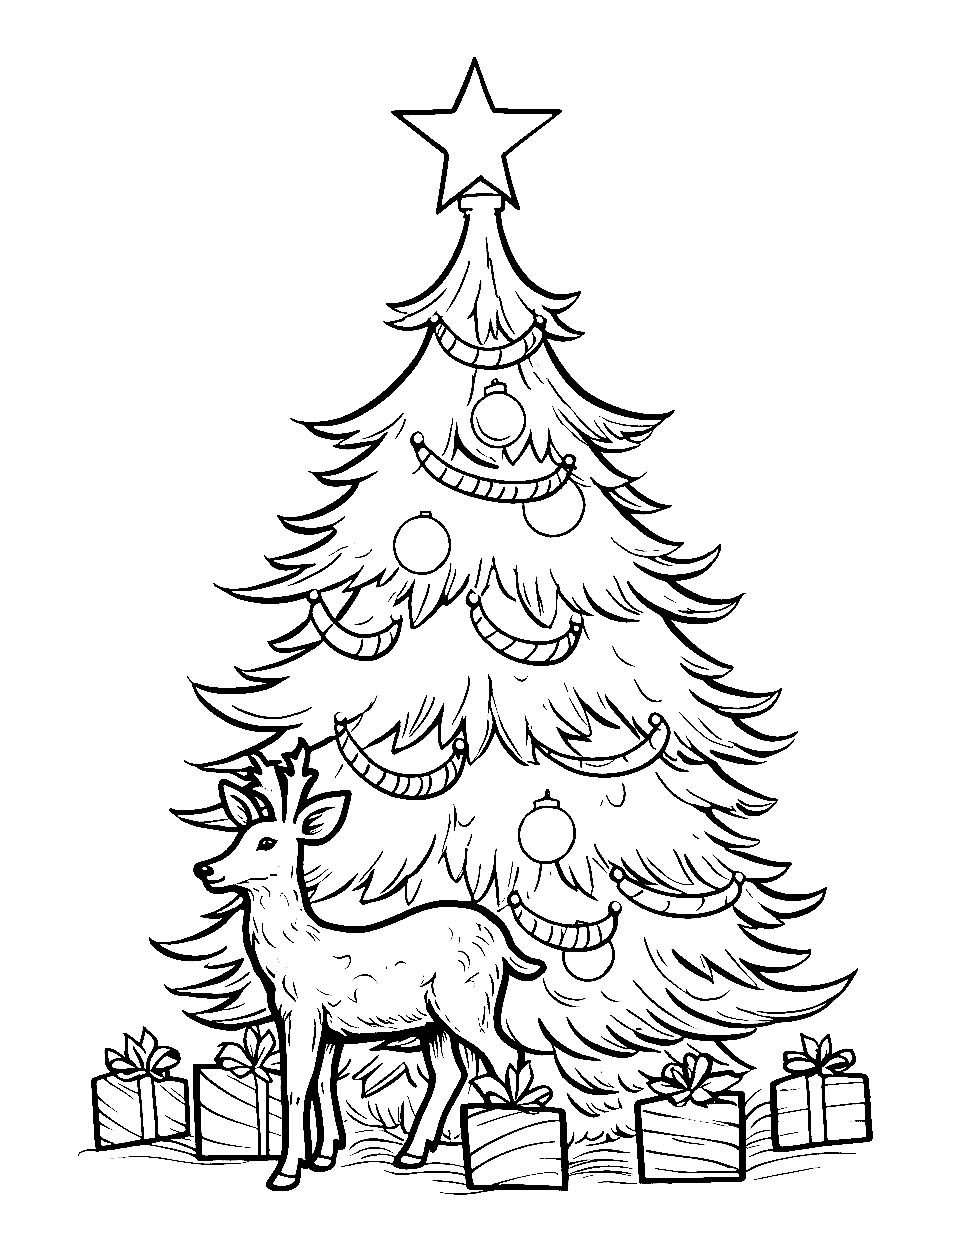 Reindeer by the Tree Coloring Page - A friendly reindeer standing next to a brightly lit and decorated Christmas tree in the calm of the night.